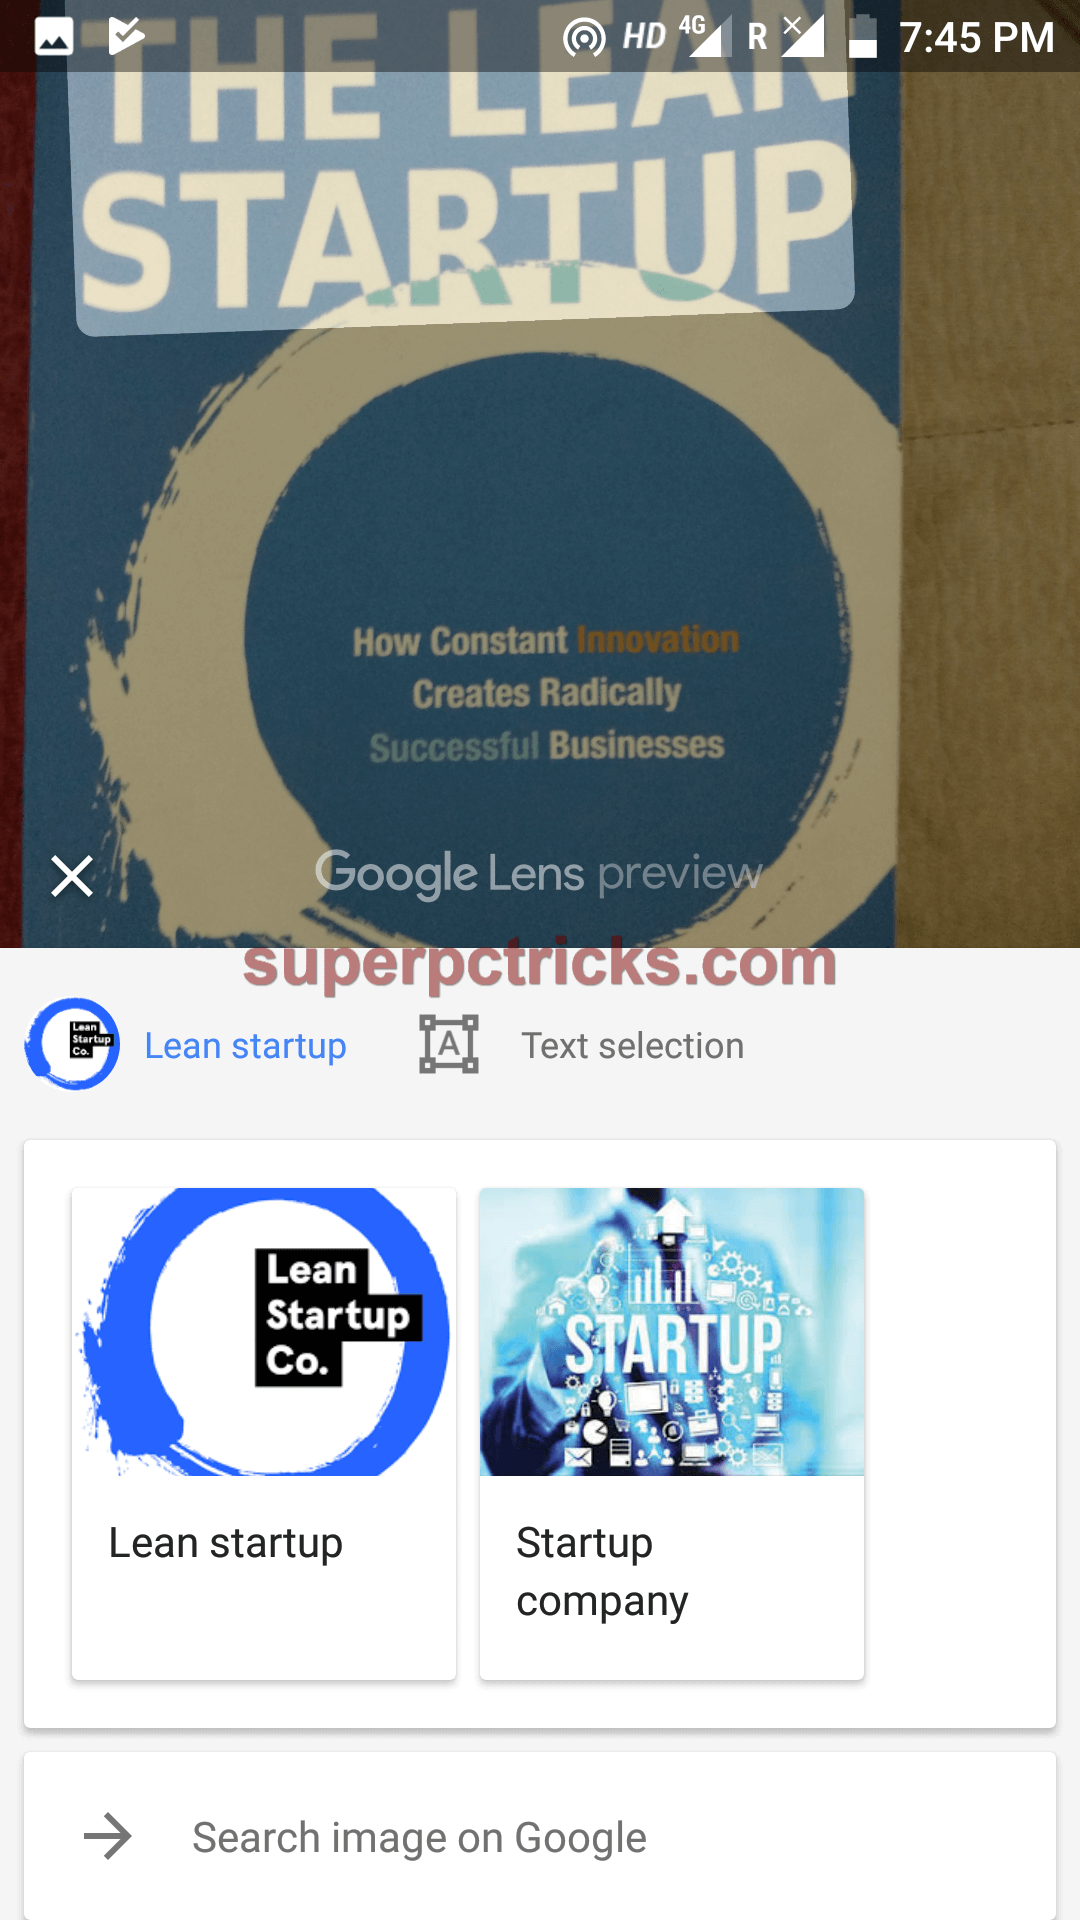 copy text from image in android